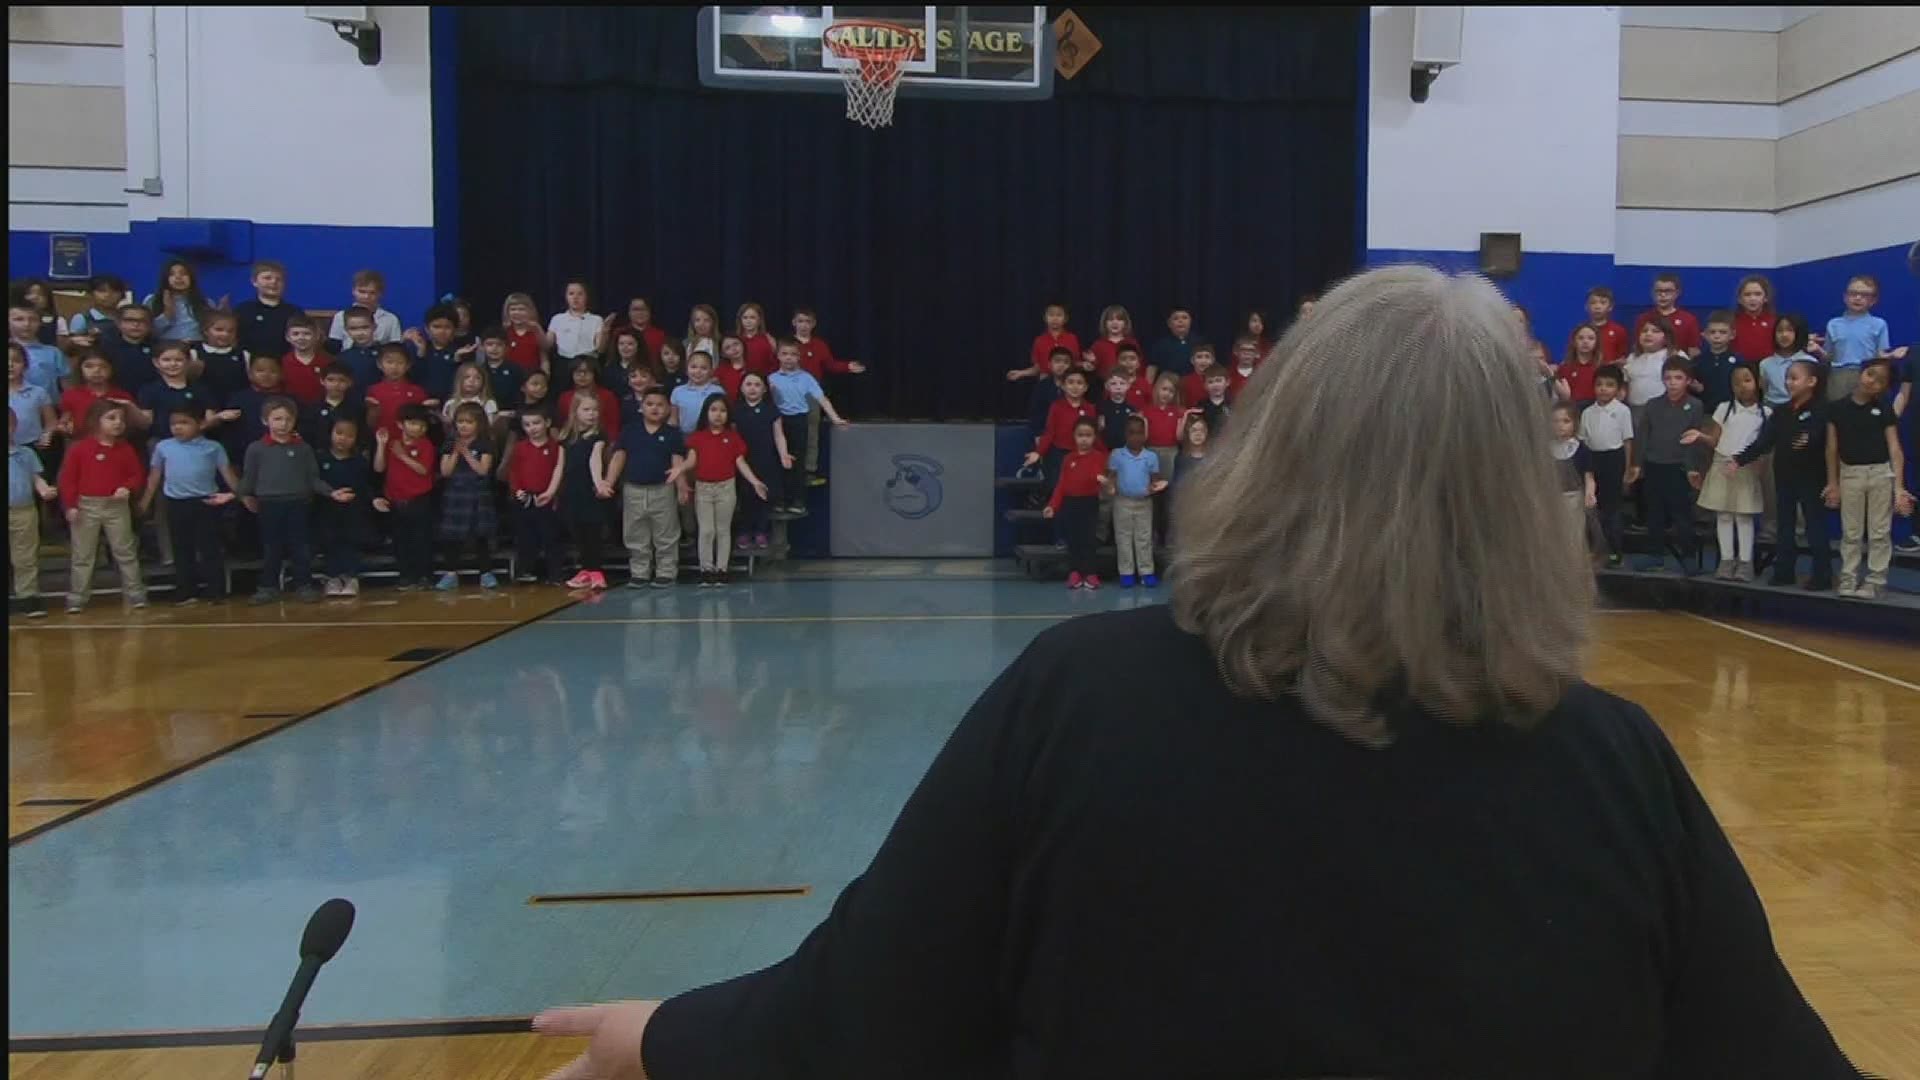 Students at All Saints Catholic School in Davenport aren't just learning about the census, they're singing about it.